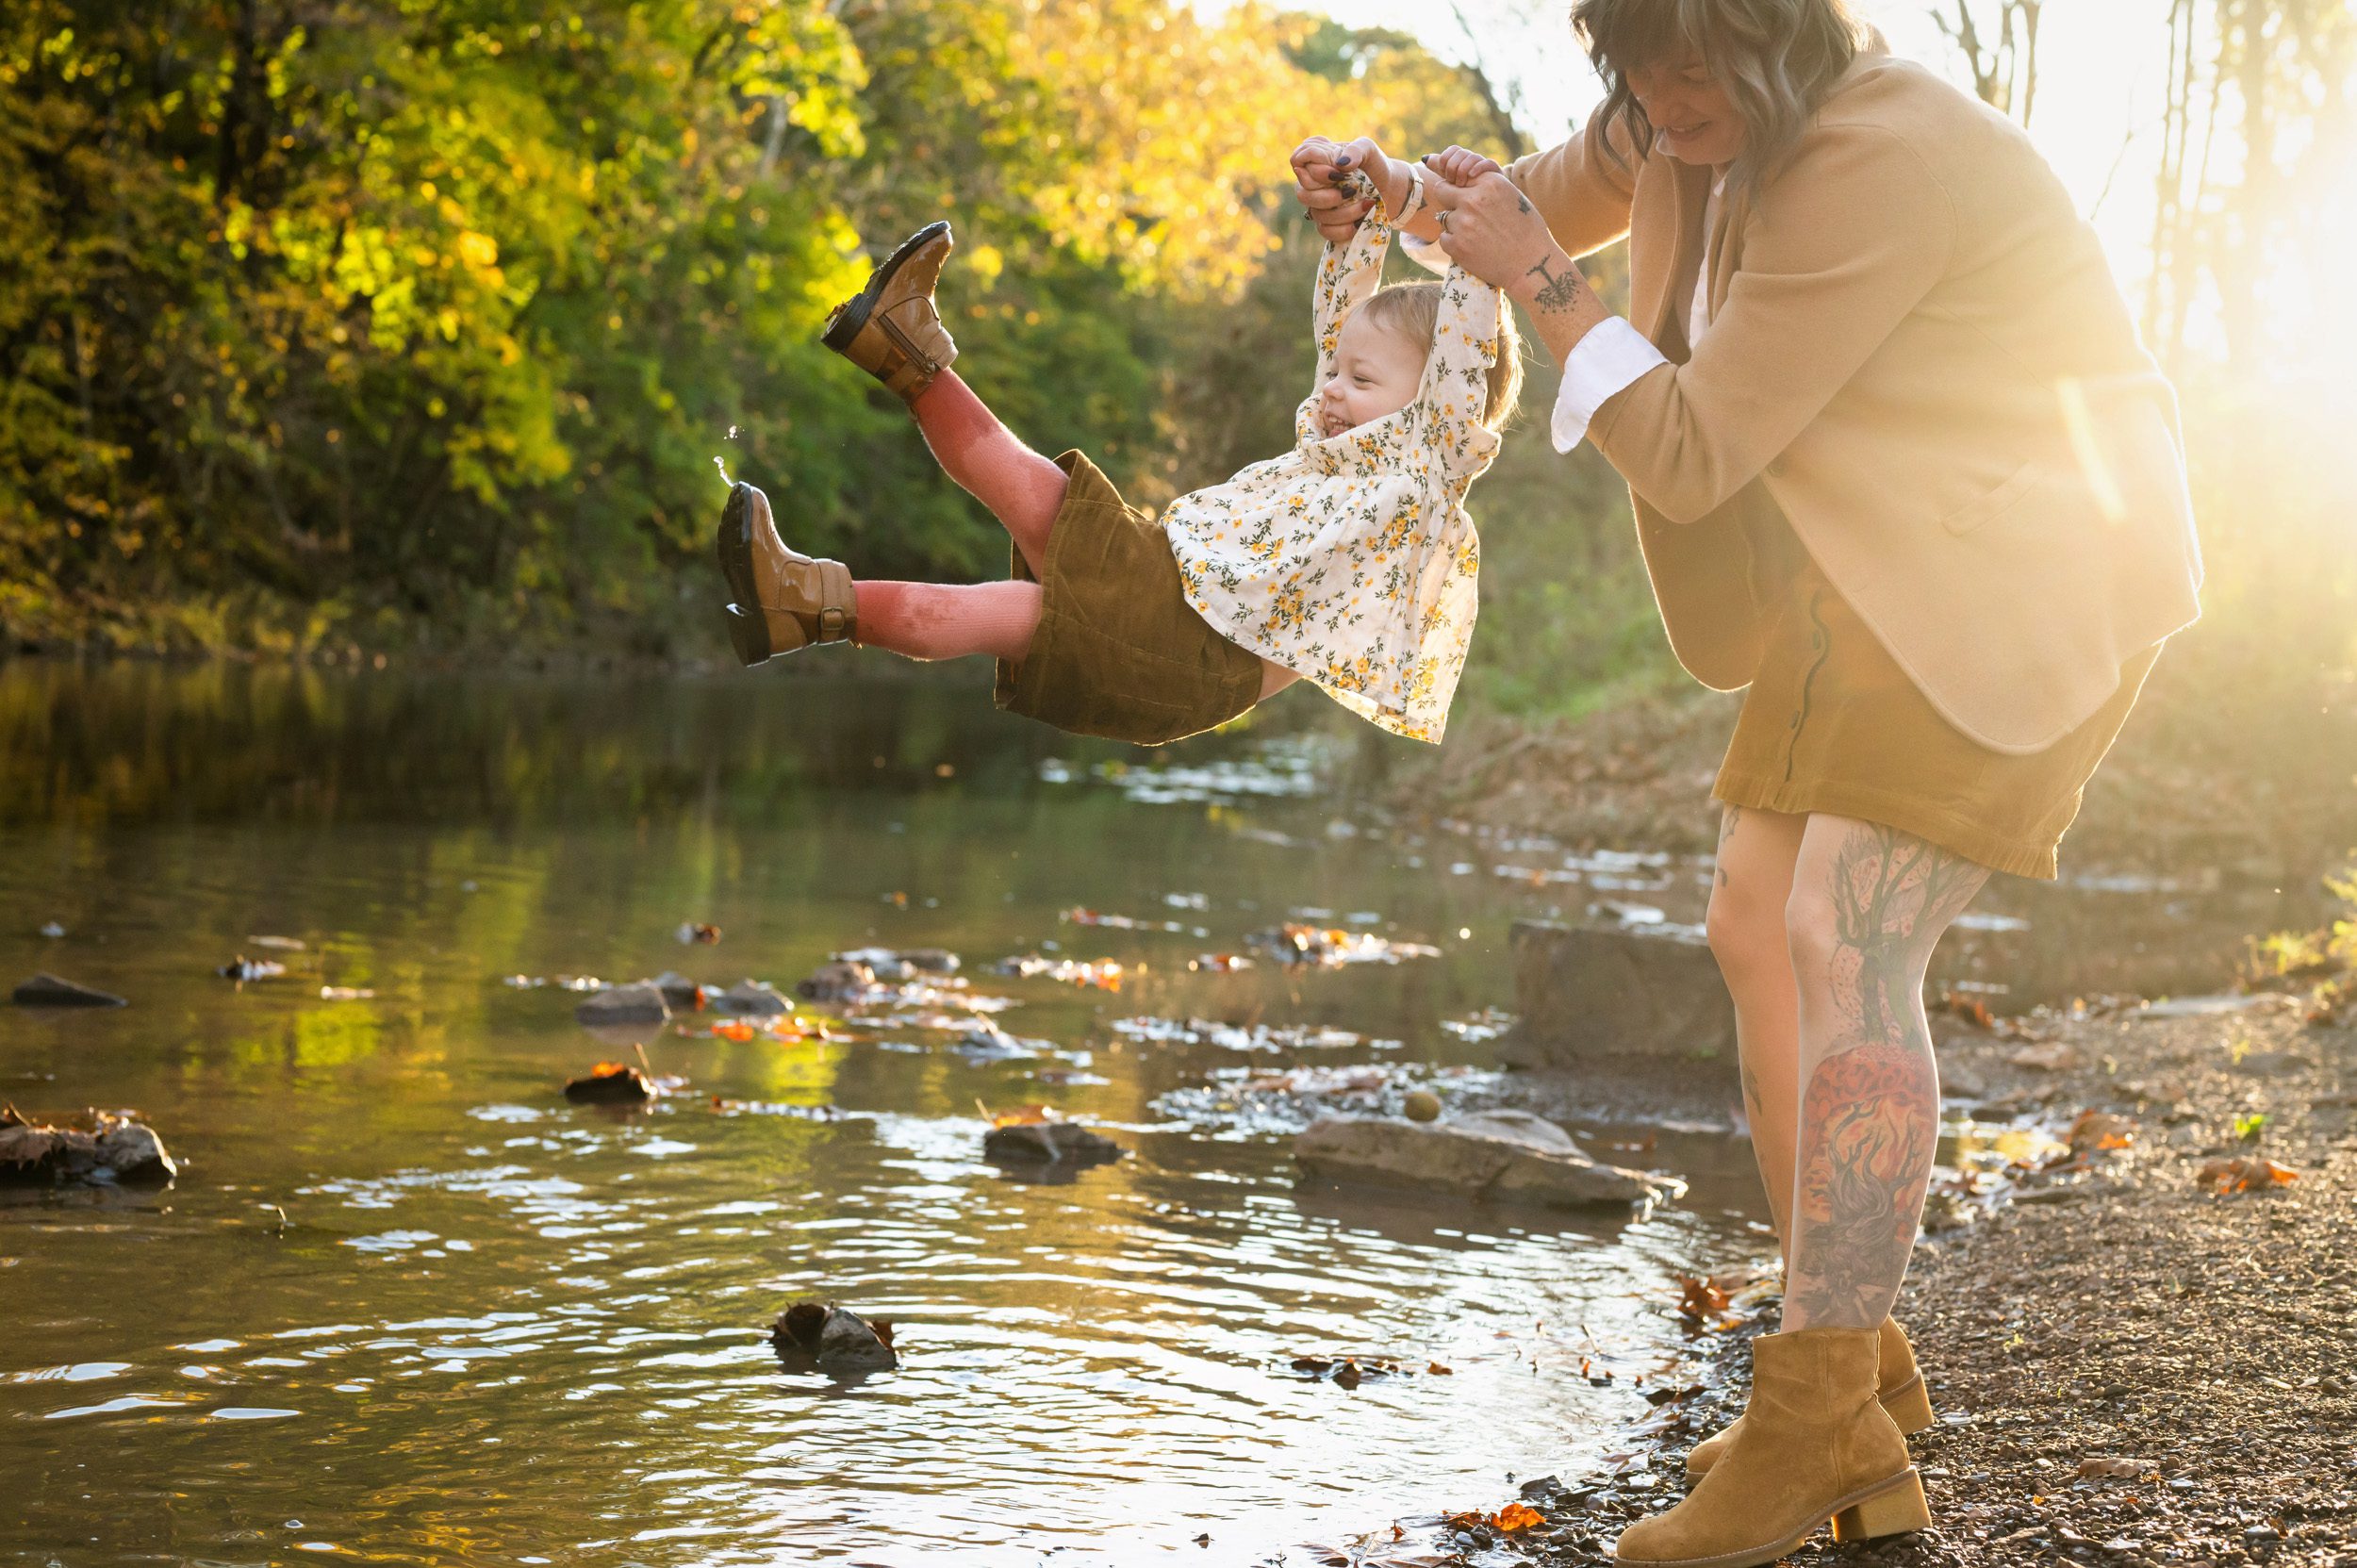 Family photo of a mom swinging her young daughter over a creek with a sun flare bursting through in the background